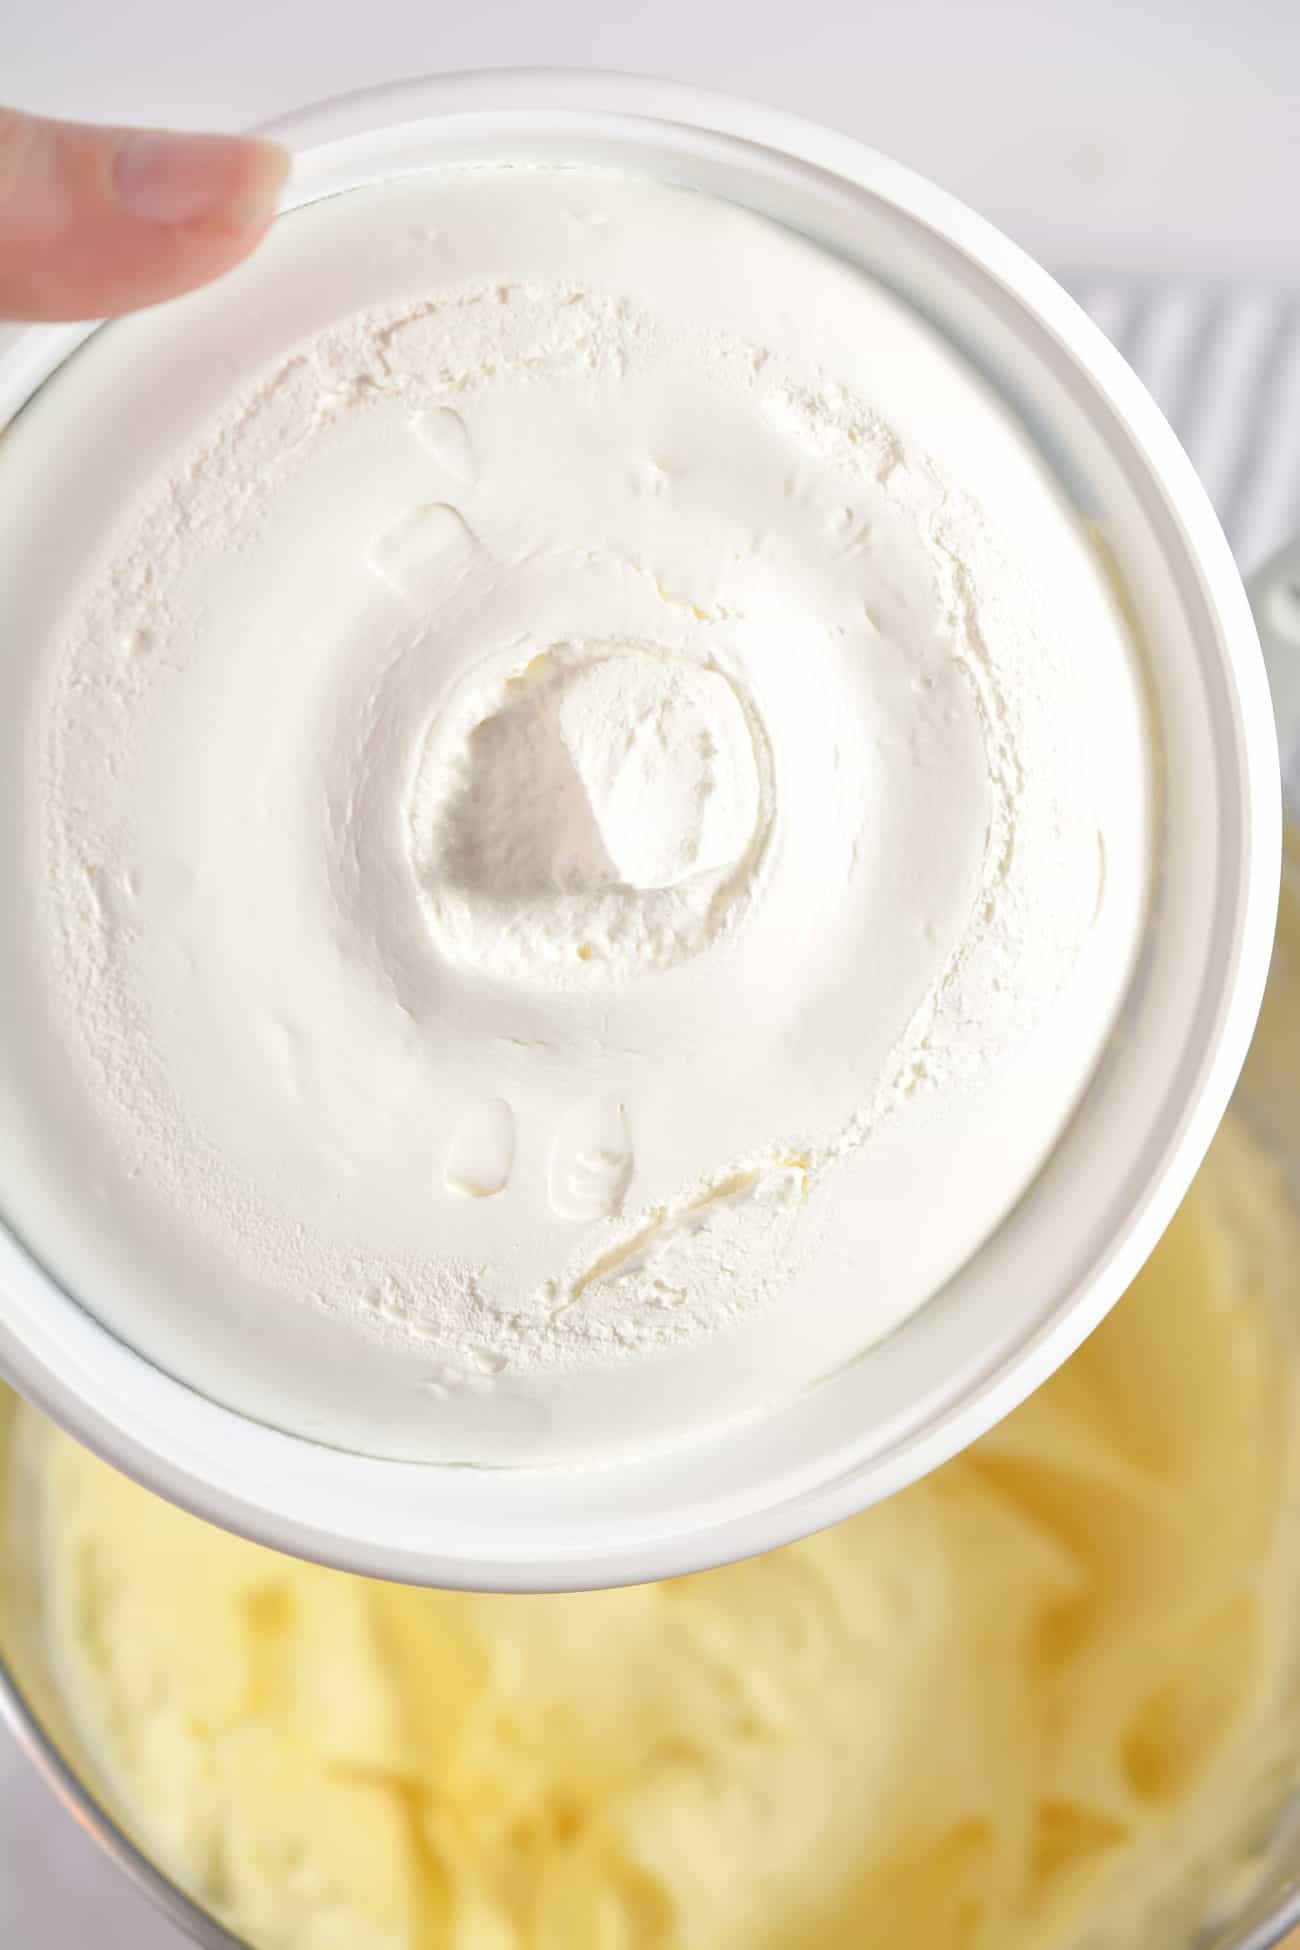 Fold the cool whip into the cream cheese and pudding mixture.